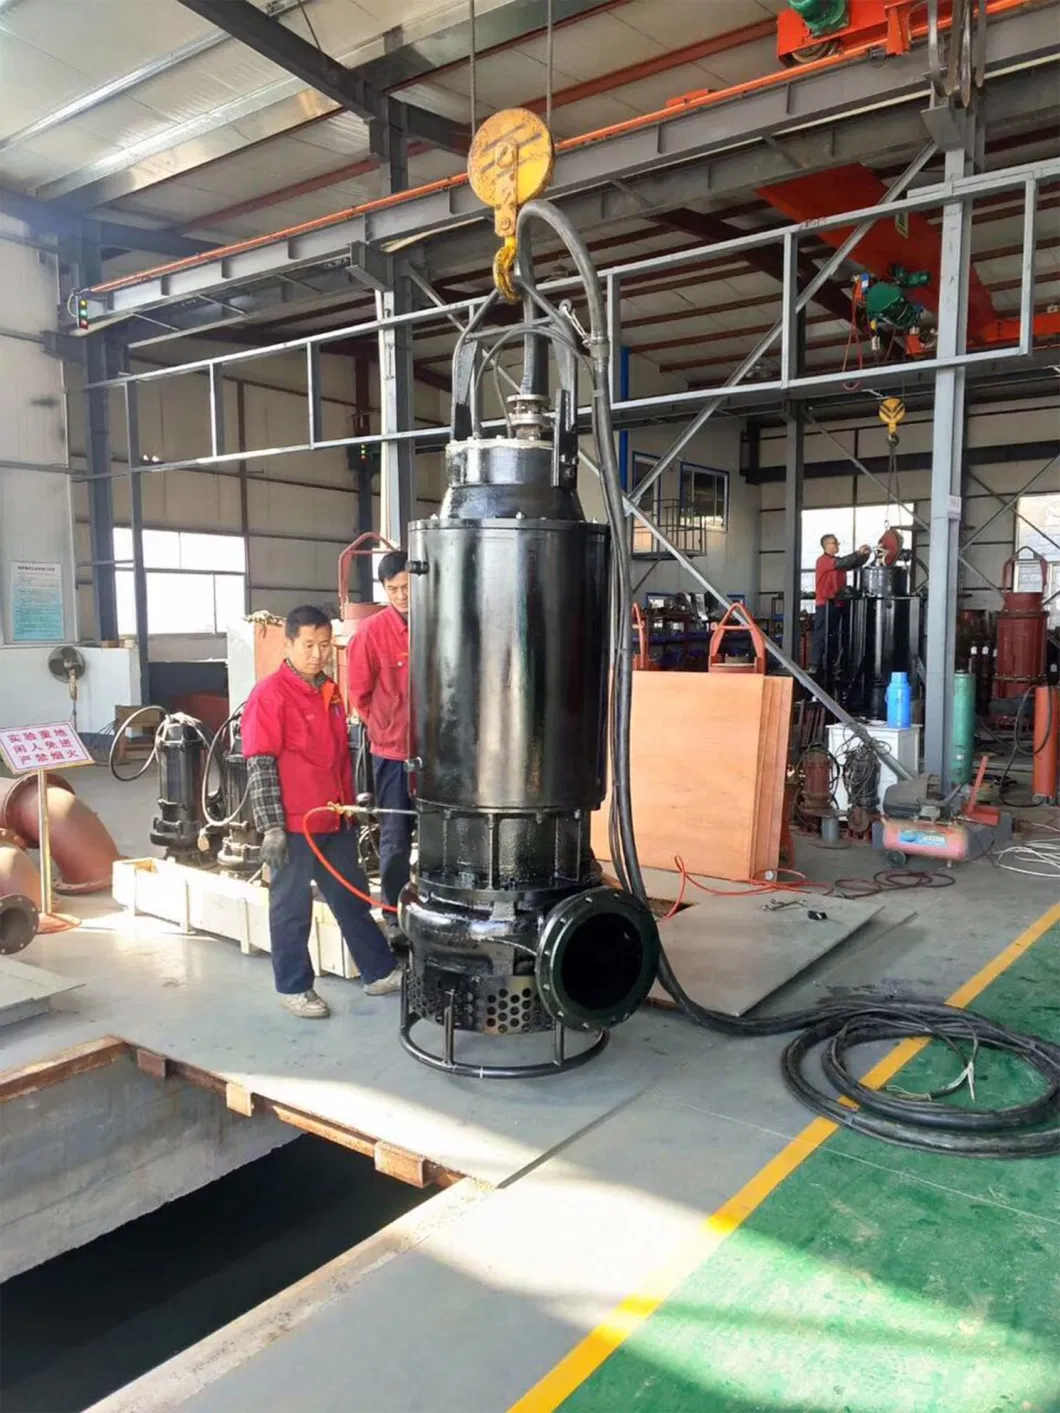 Zjq Industrial Submersible Dredging Sand Sewage Slurry Pump with Non-Clogging Impeller Design for Wastewater Treatment Plants